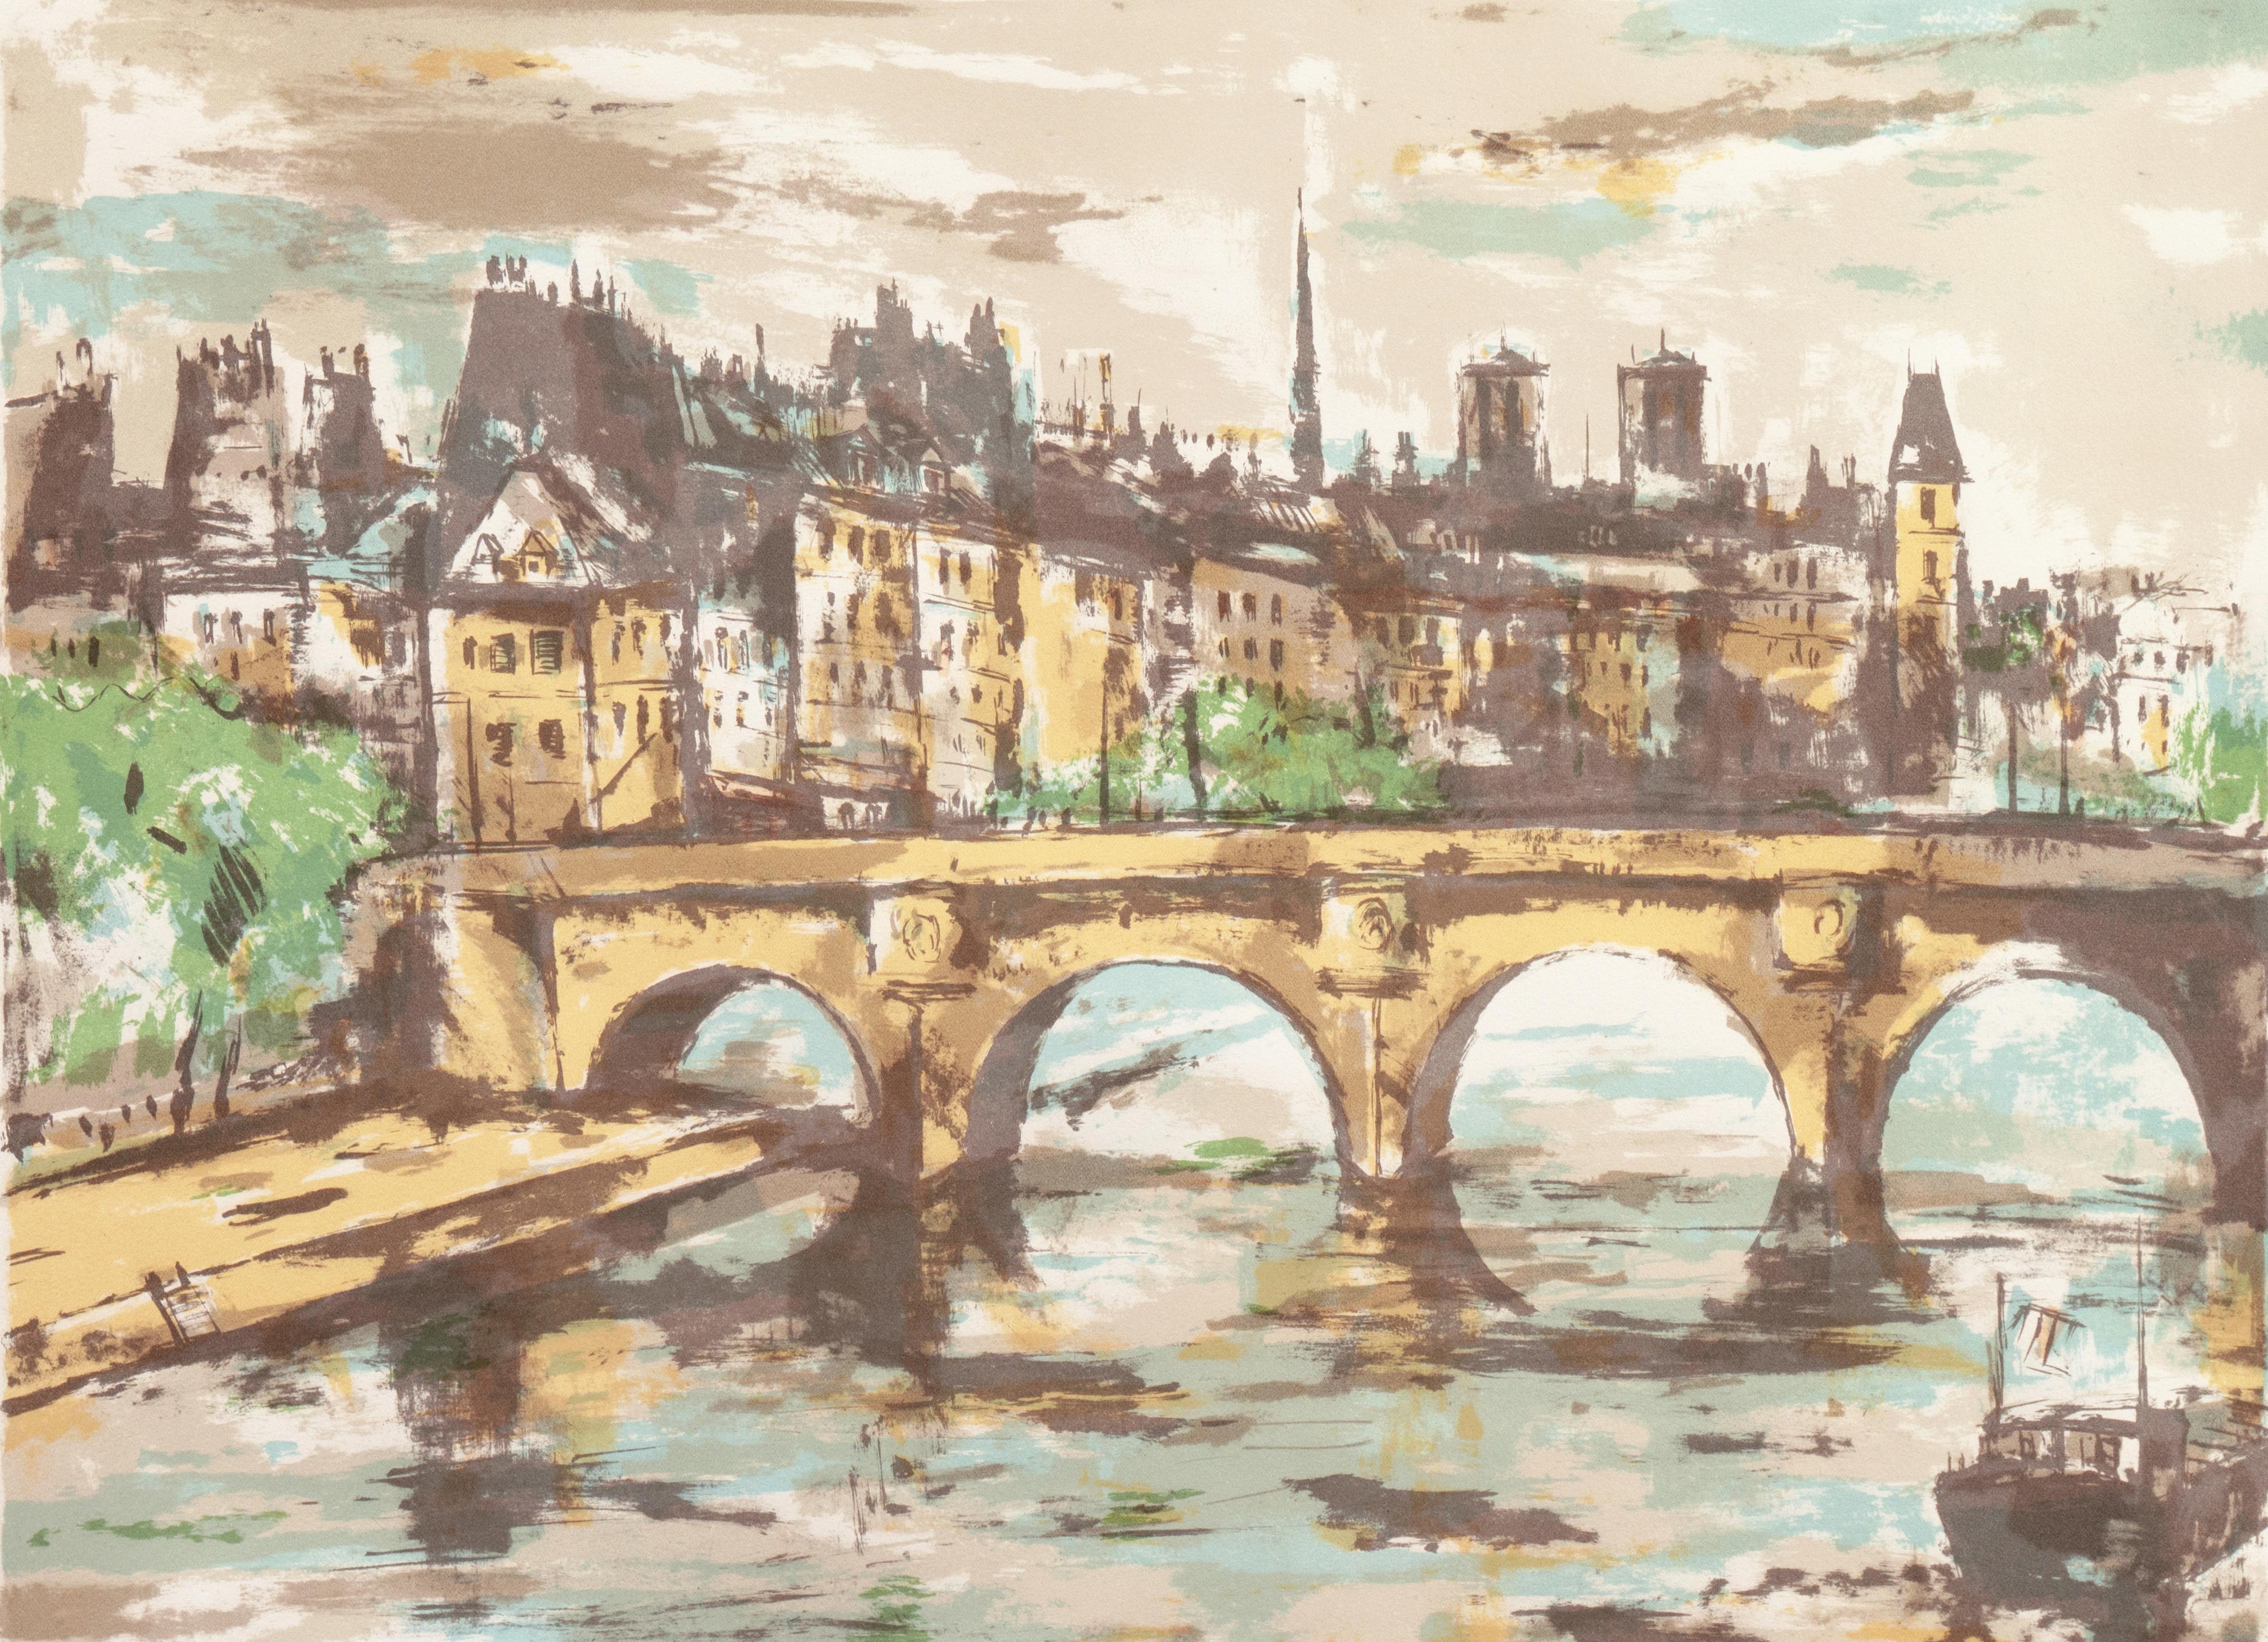 « The Pont Neuf with Notre Dame in the Distance » (Le Pont Neuf avec Notre Dame à distance), Tokyo Fine Arts Academy